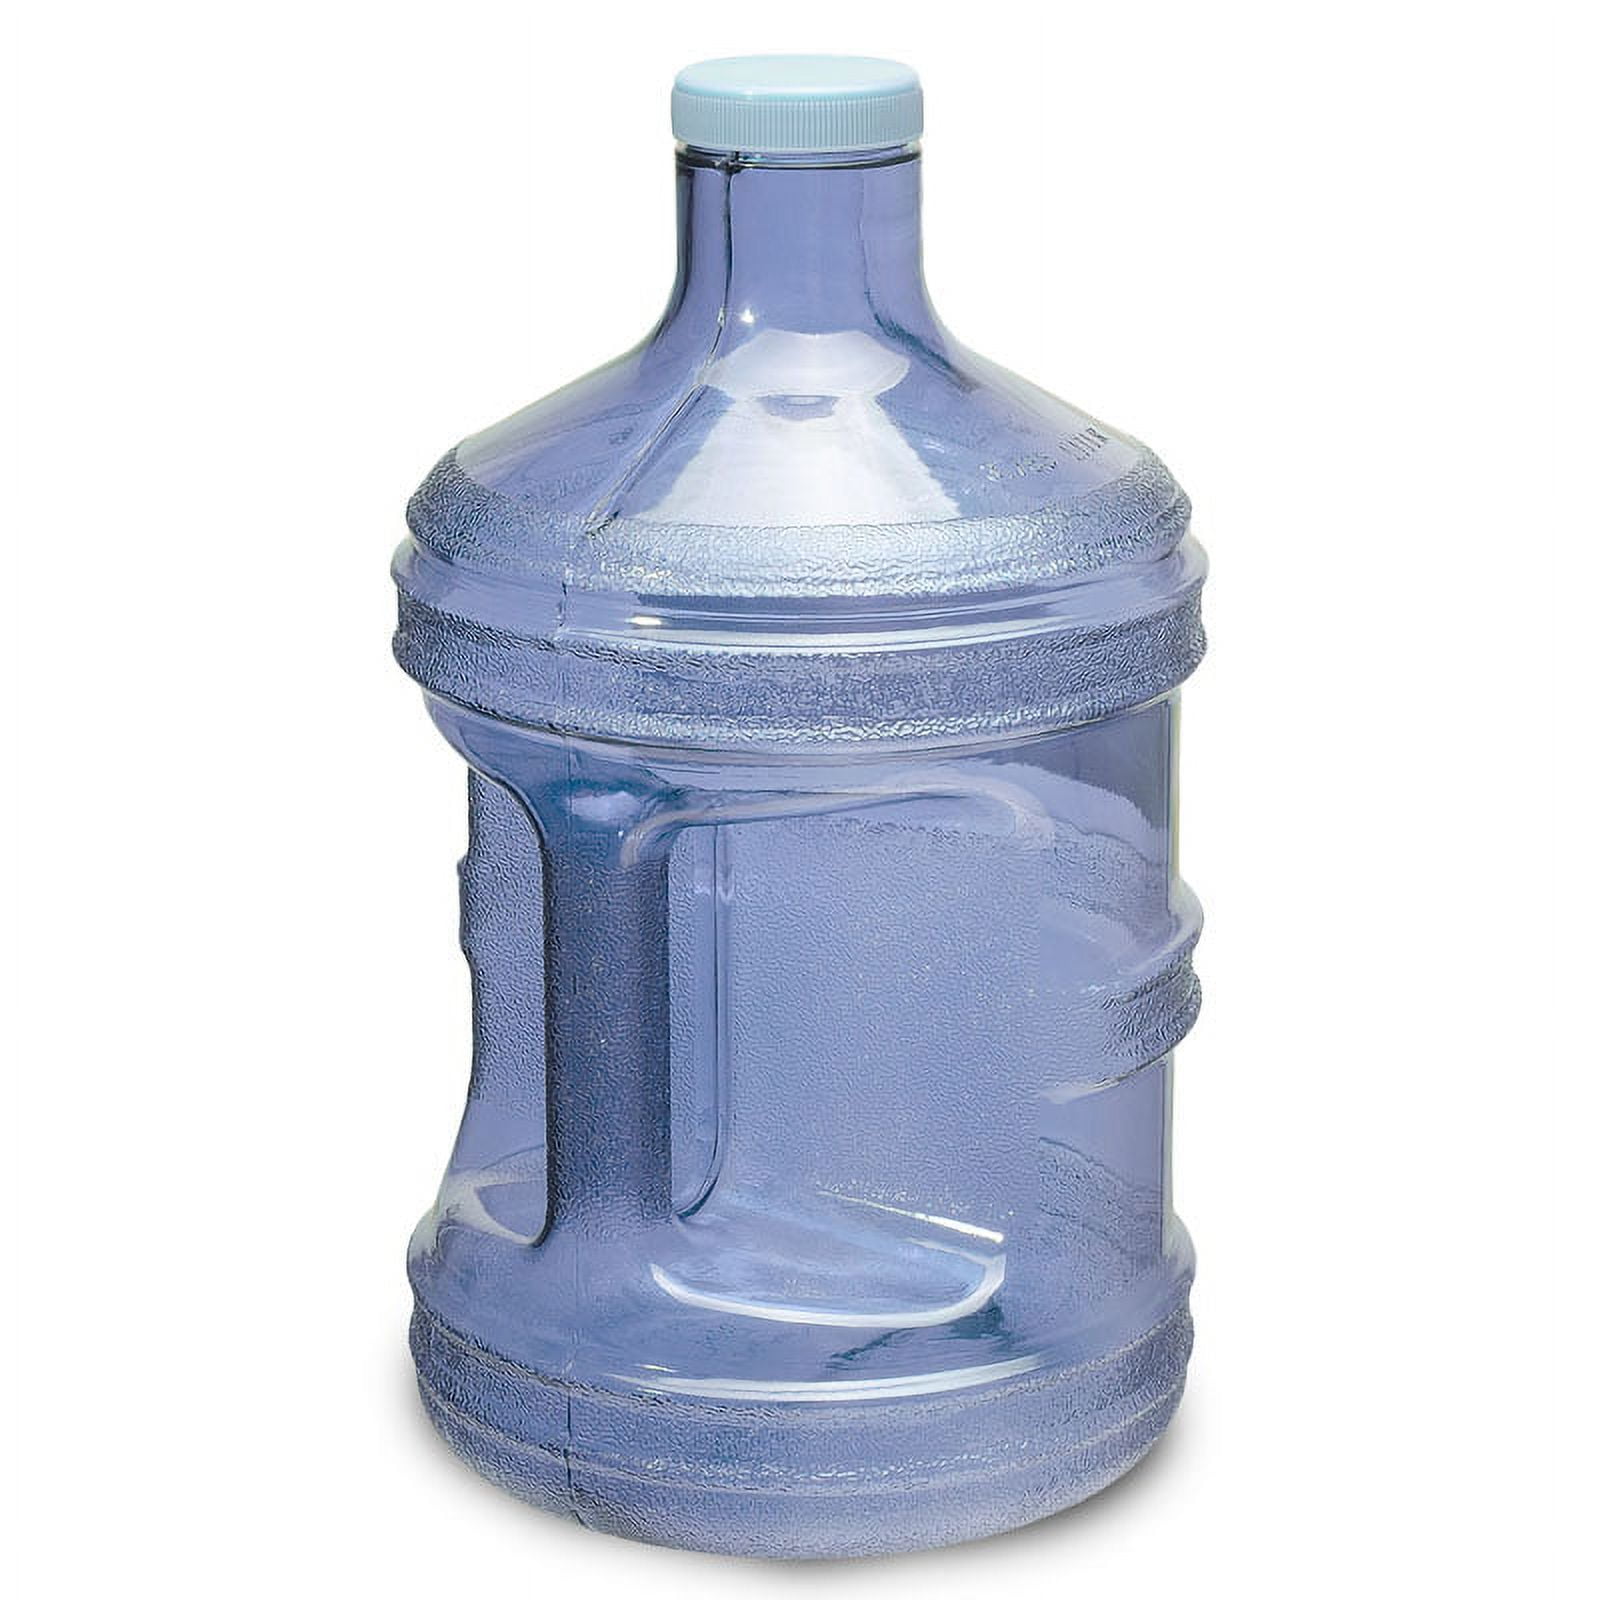 1 Gallon BPA Free Reusable Plastic Drinking Water Big Mouth Bottle Jug Container with Holder Drinking Canteen - Light Blue